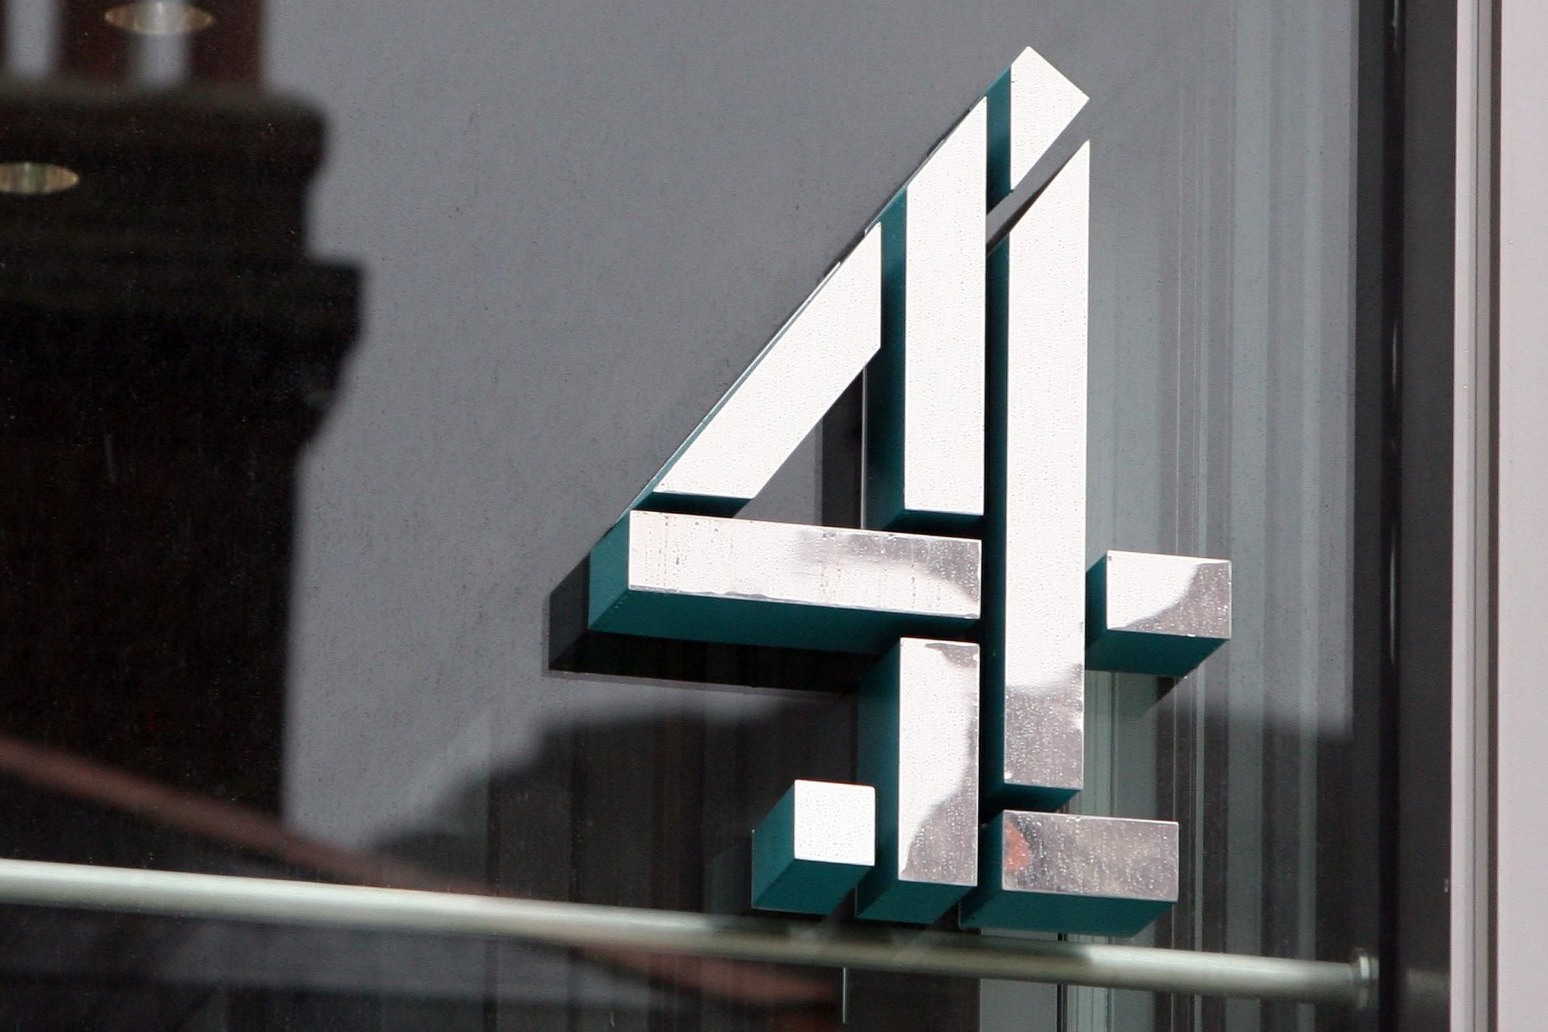 Channel 4 lays out alternative plan to privatisation following White Paper 